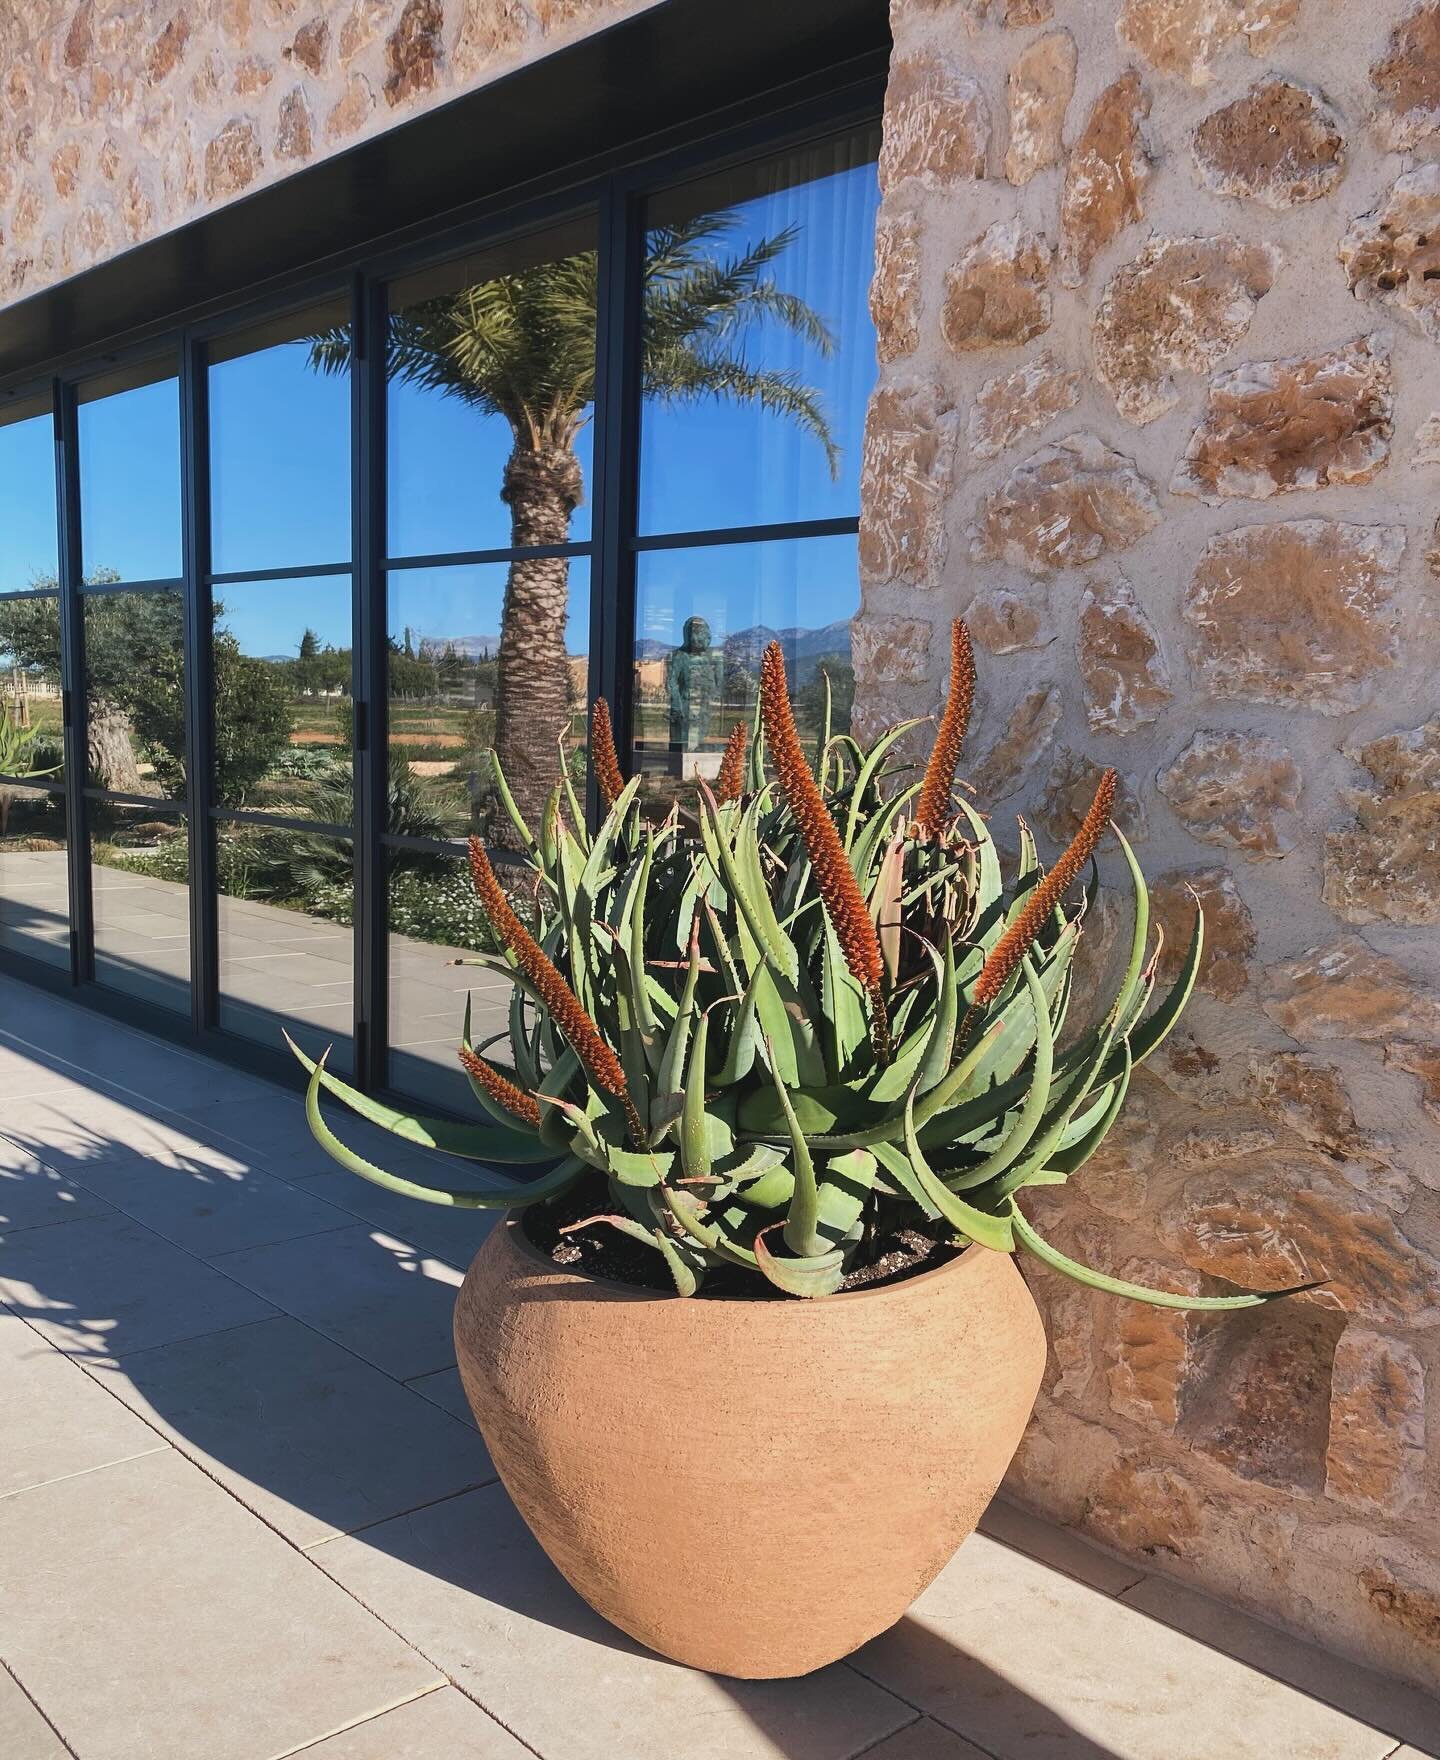 Specimen Aloe castanea is a stunning architectural plant  for this project in Biniali. We procure the more rare and original plants for our containers to make them special features by themselves. -
-
-
#landscapedesign #landdcspedesigner #gardendesig